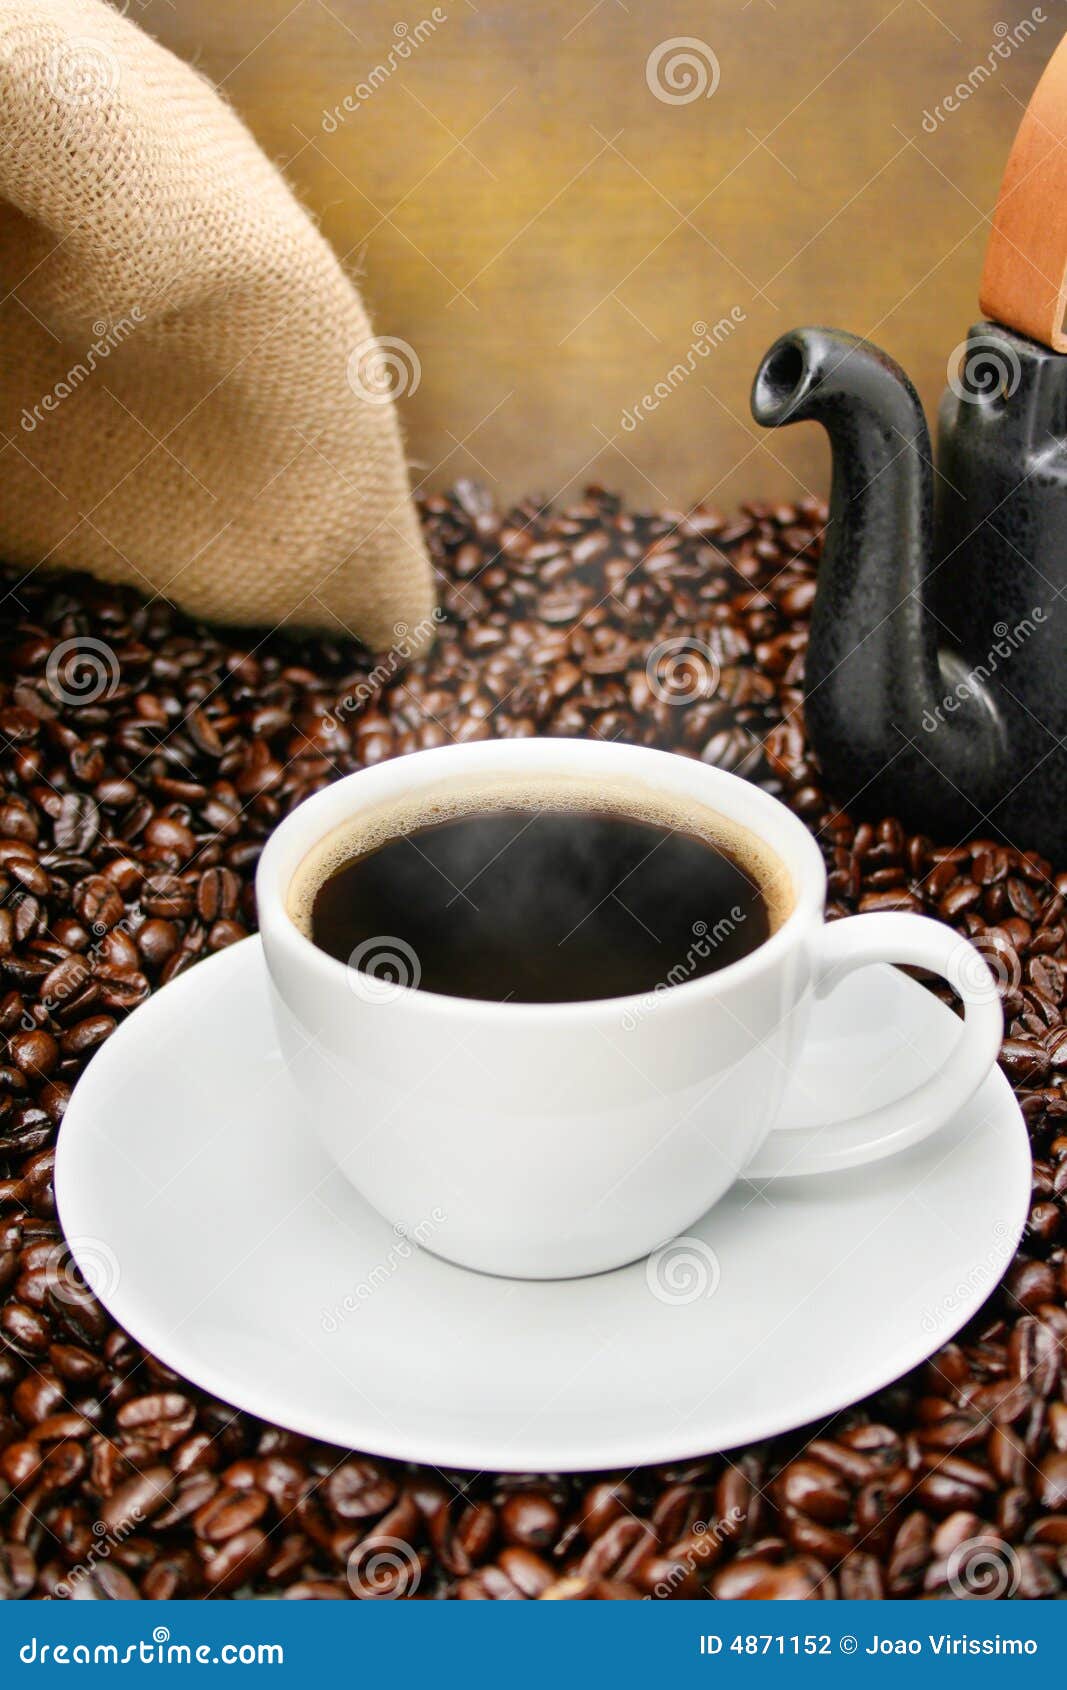 freshly brewed coffee cup over roasted beans